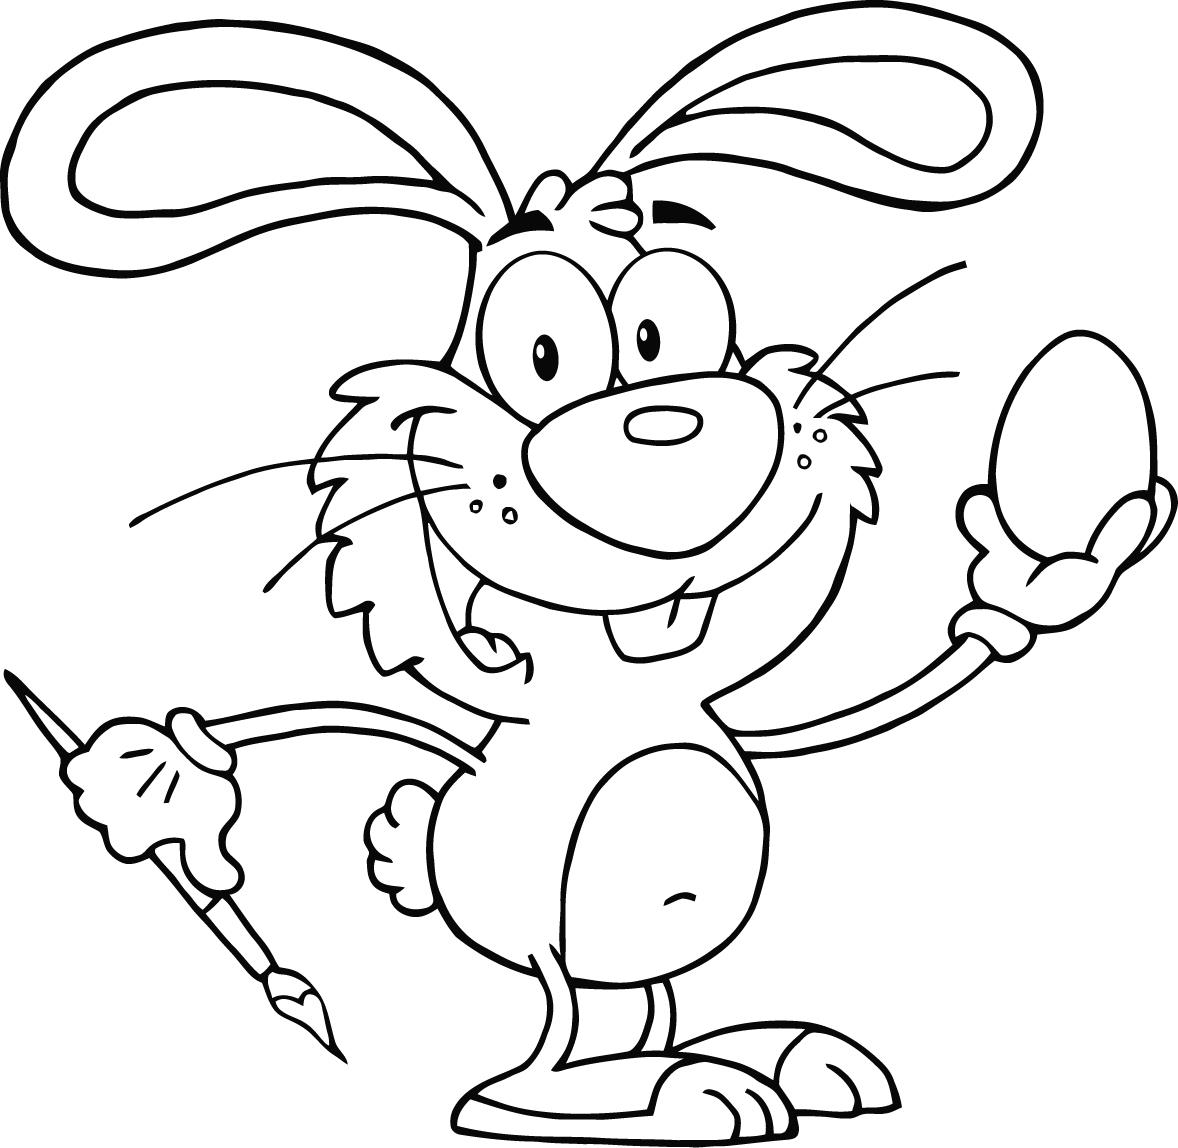 Bunny Printable Coloring Pages 4